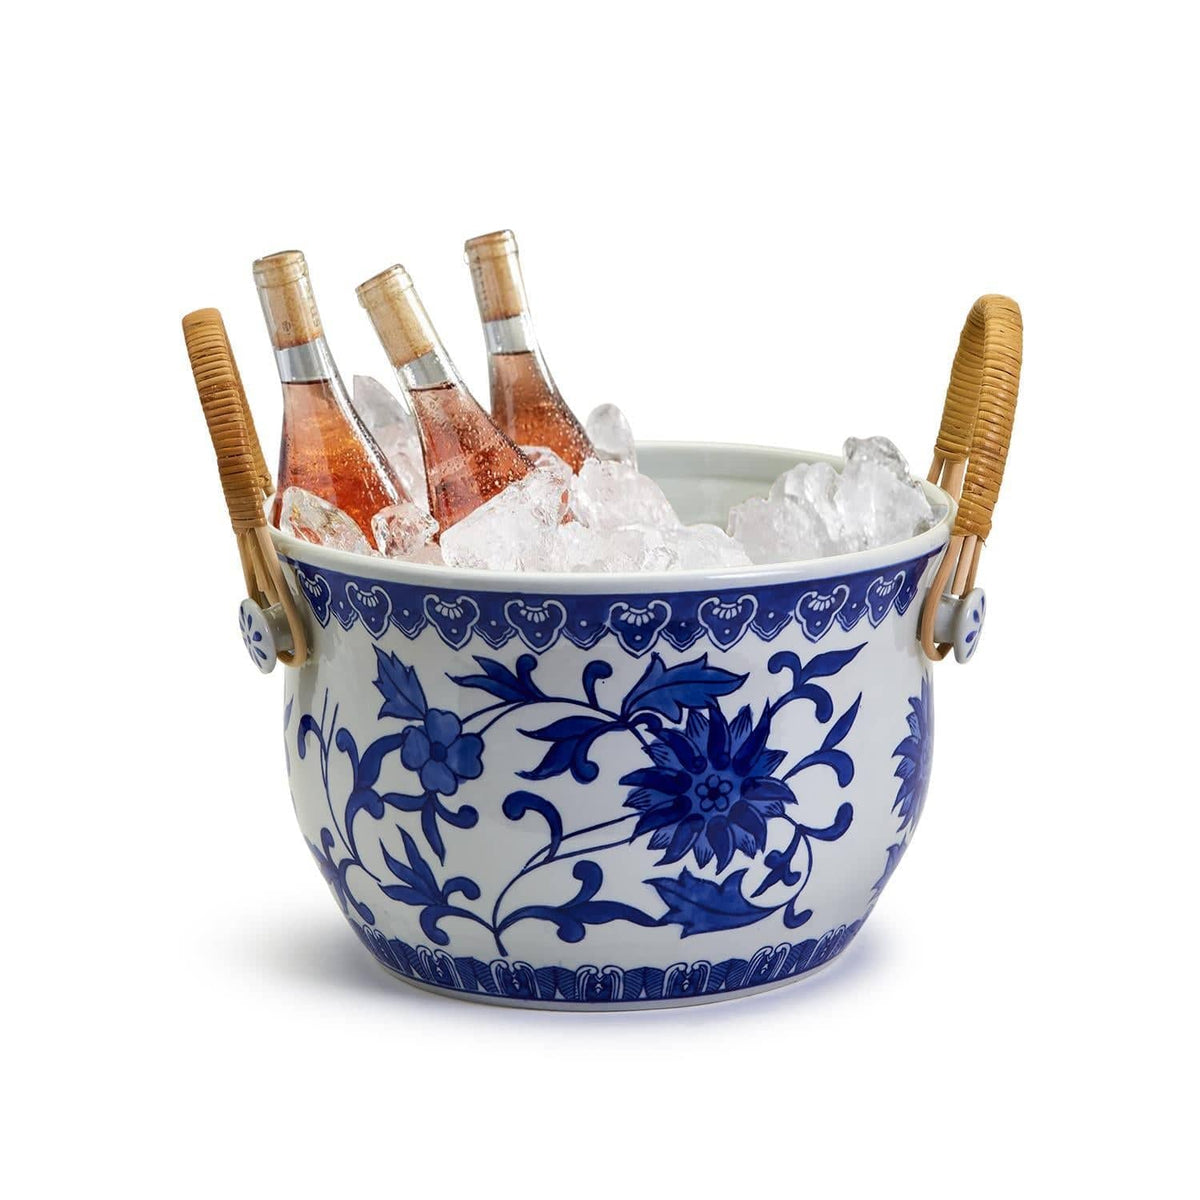 Chinoiserie Blue and White Party Bucket with Bamboo Handles - The Preppy Bunny